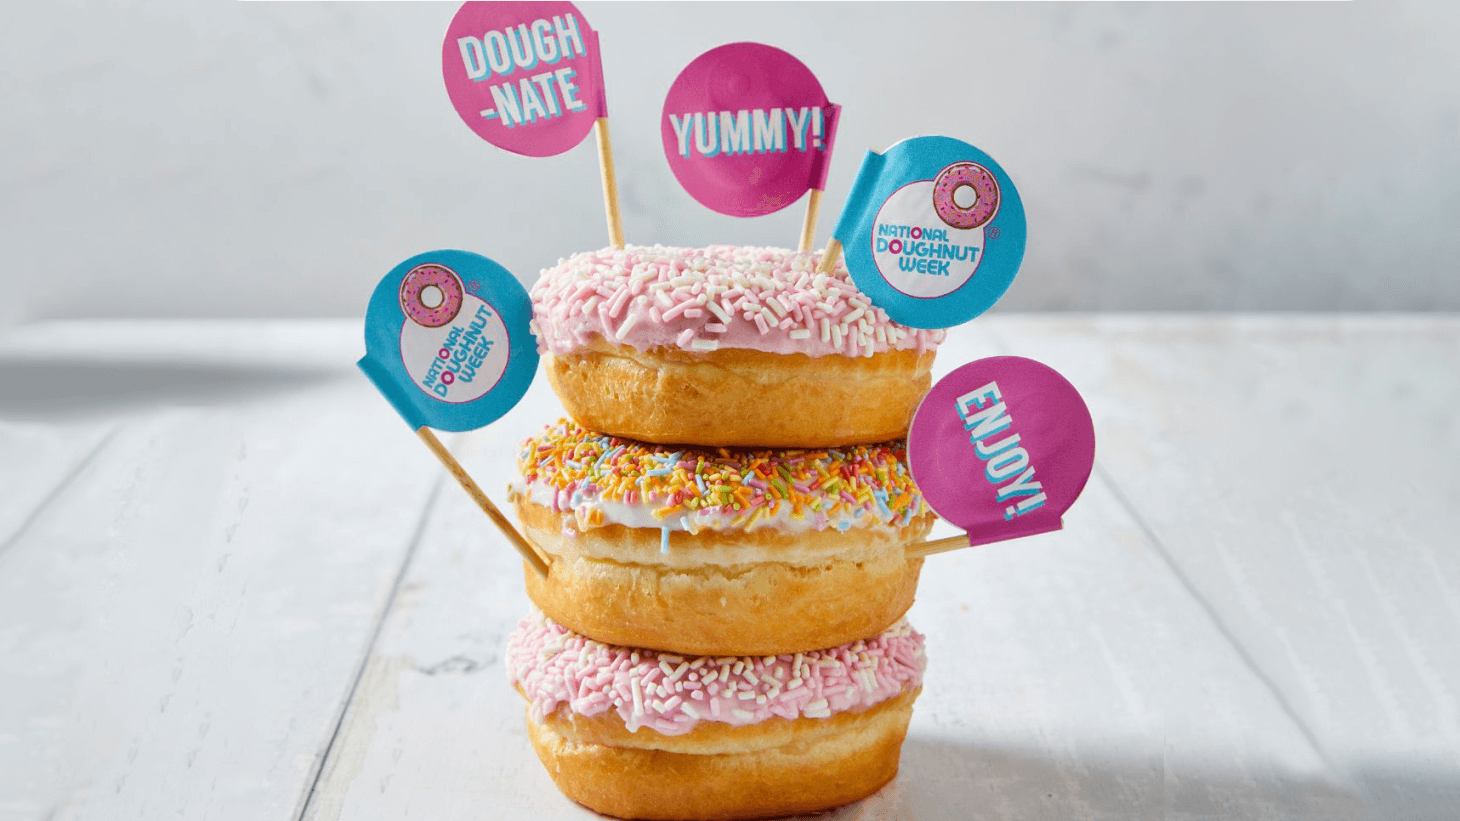 What’s On – National Doughnut Week: 18th – 26th May